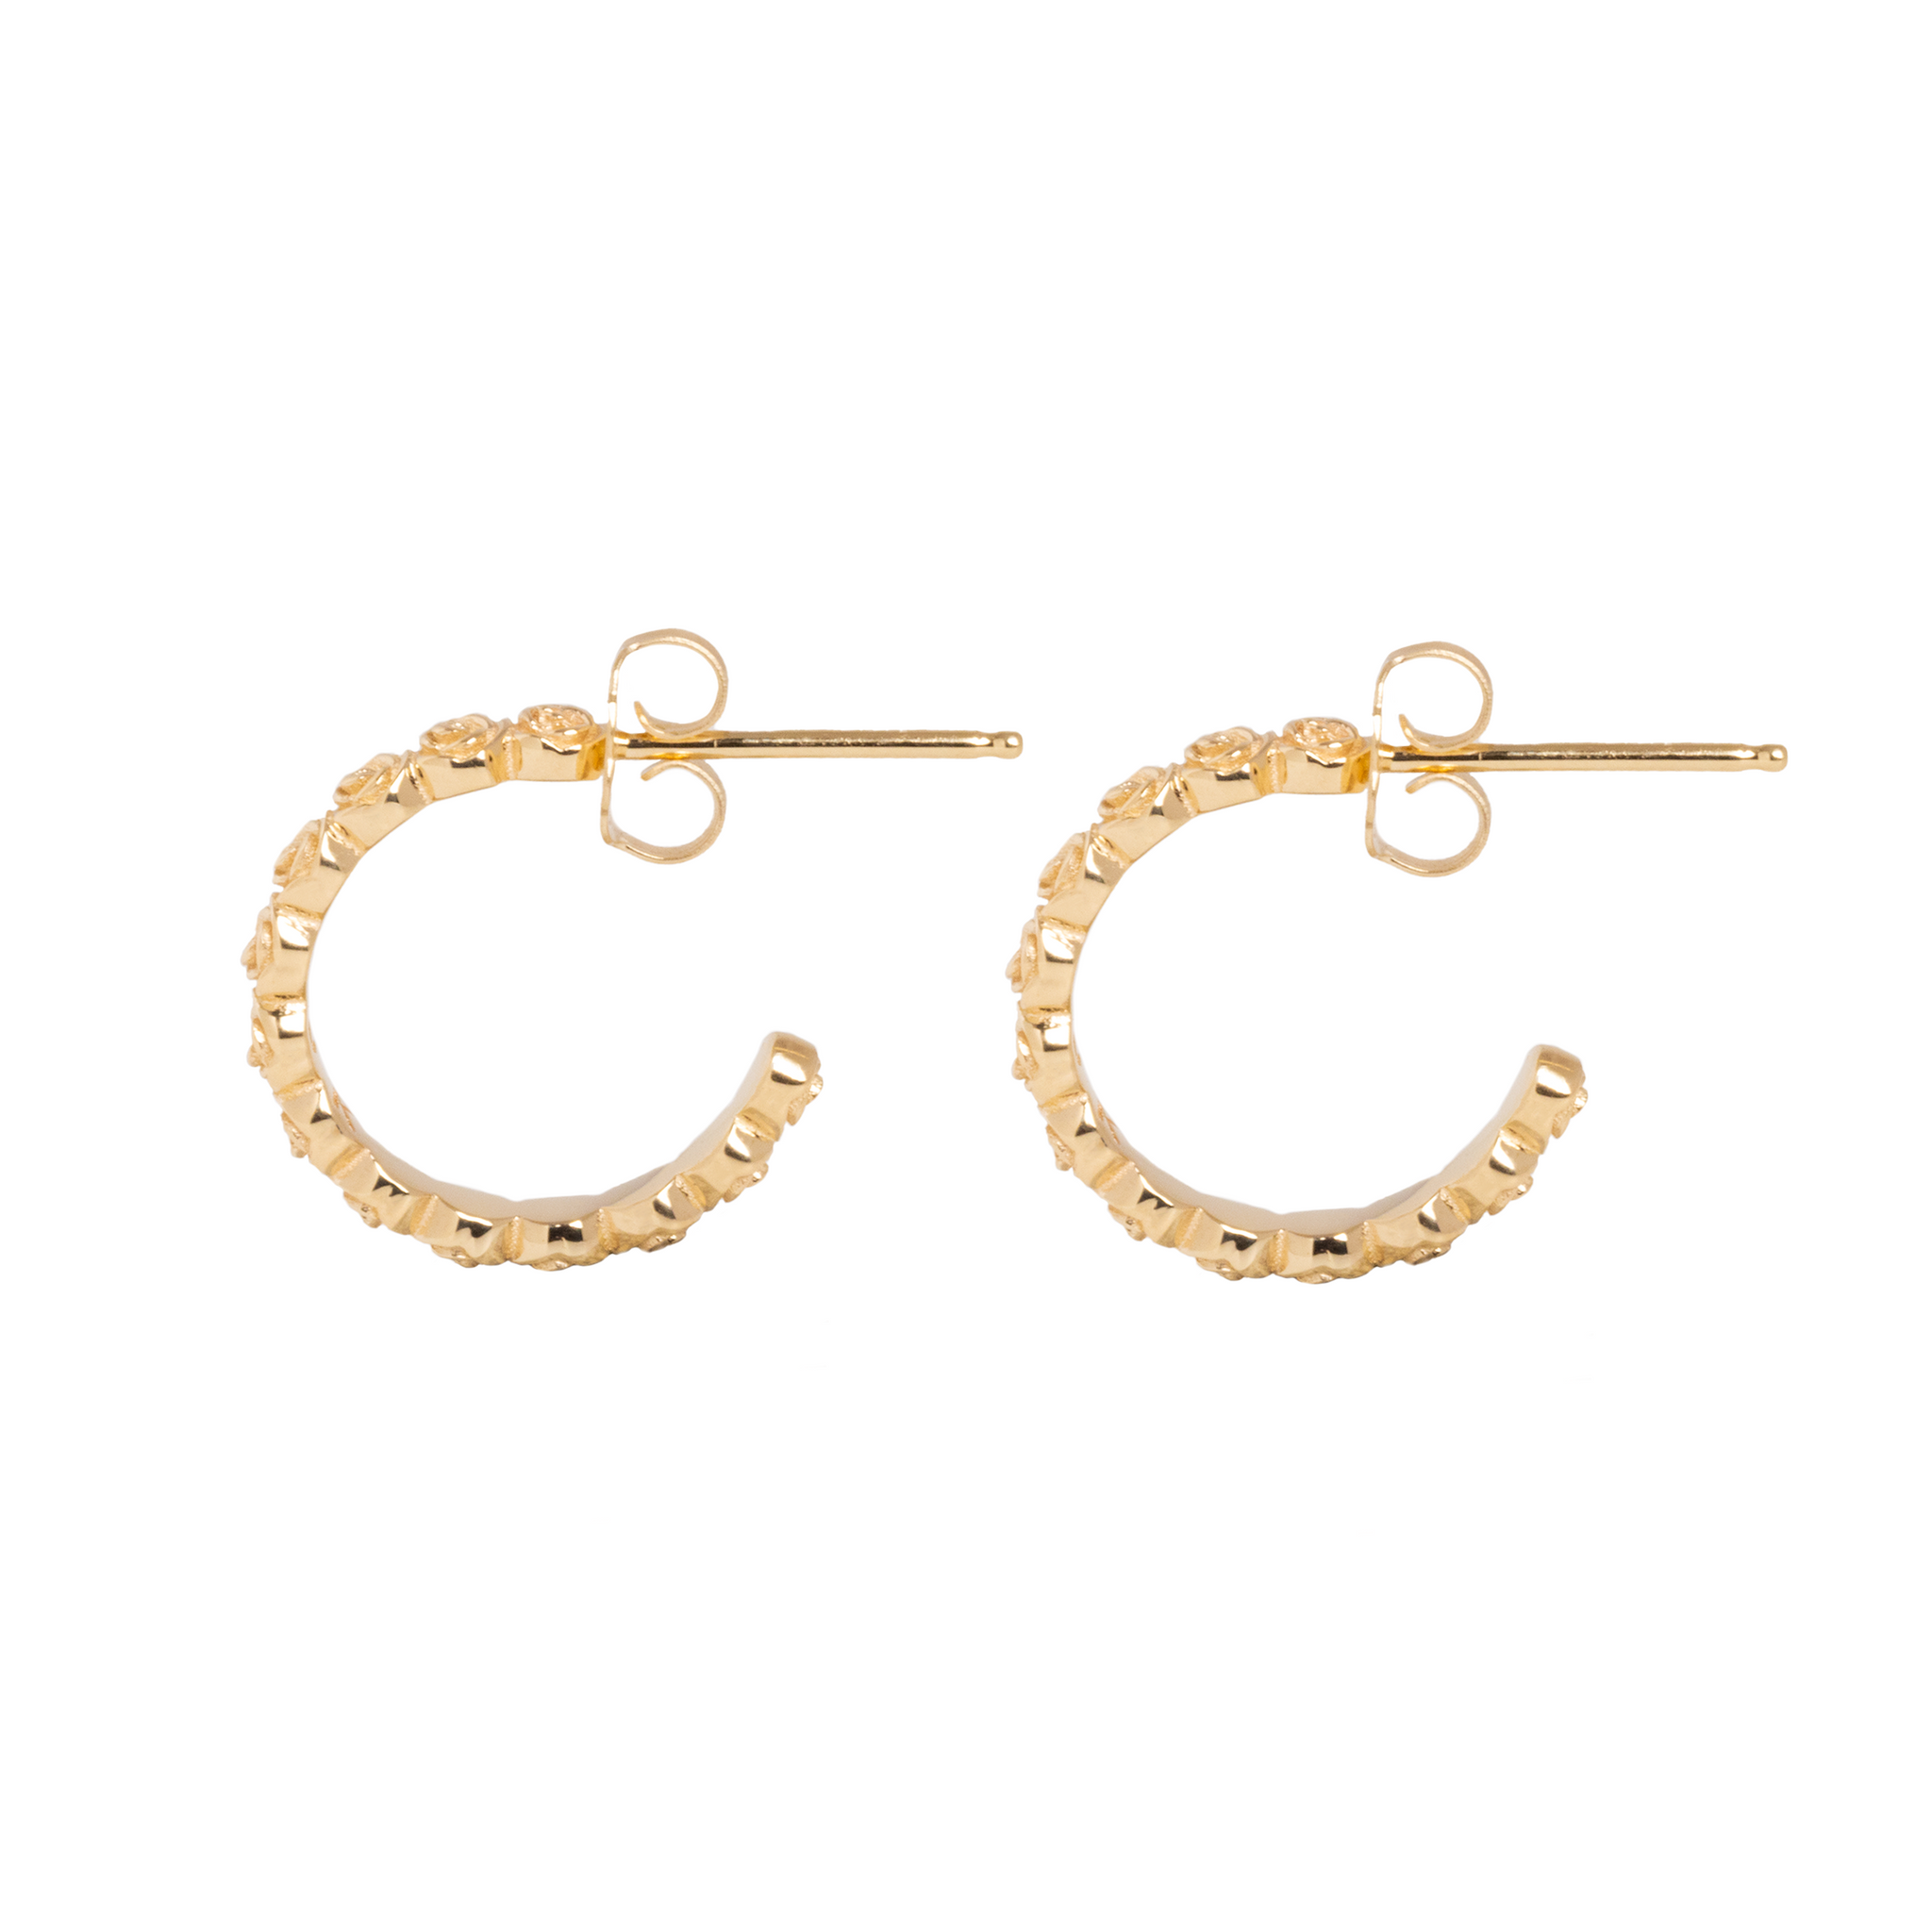 10K Gold Super Micro Rose Earrings on white background side view